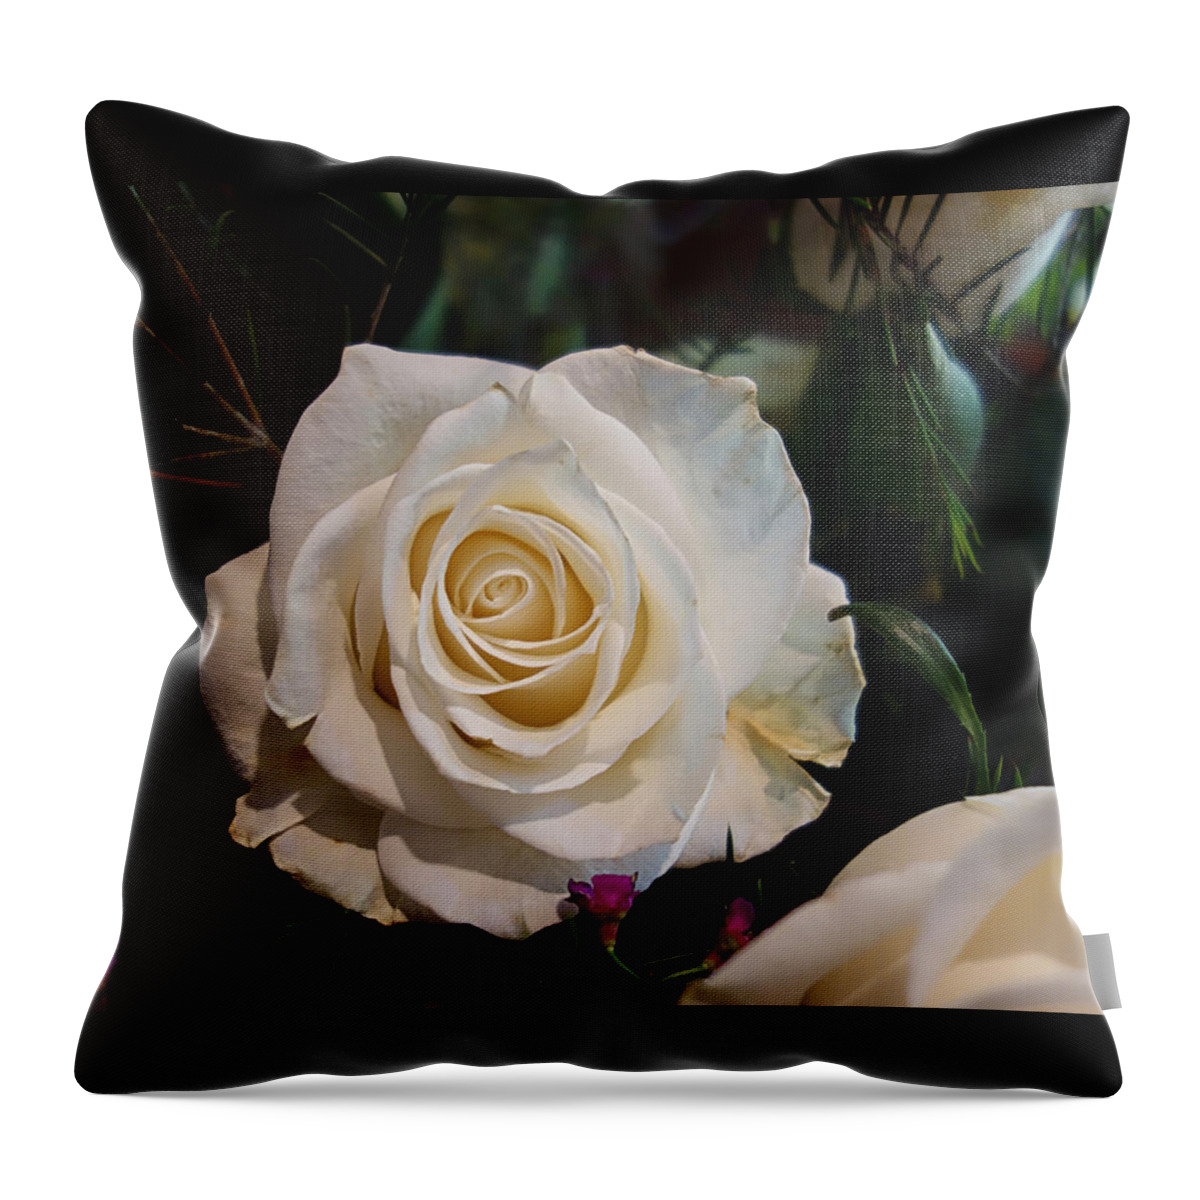 Flower Throw Pillow featuring the photograph Mothers Day White Rose by Russel Considine